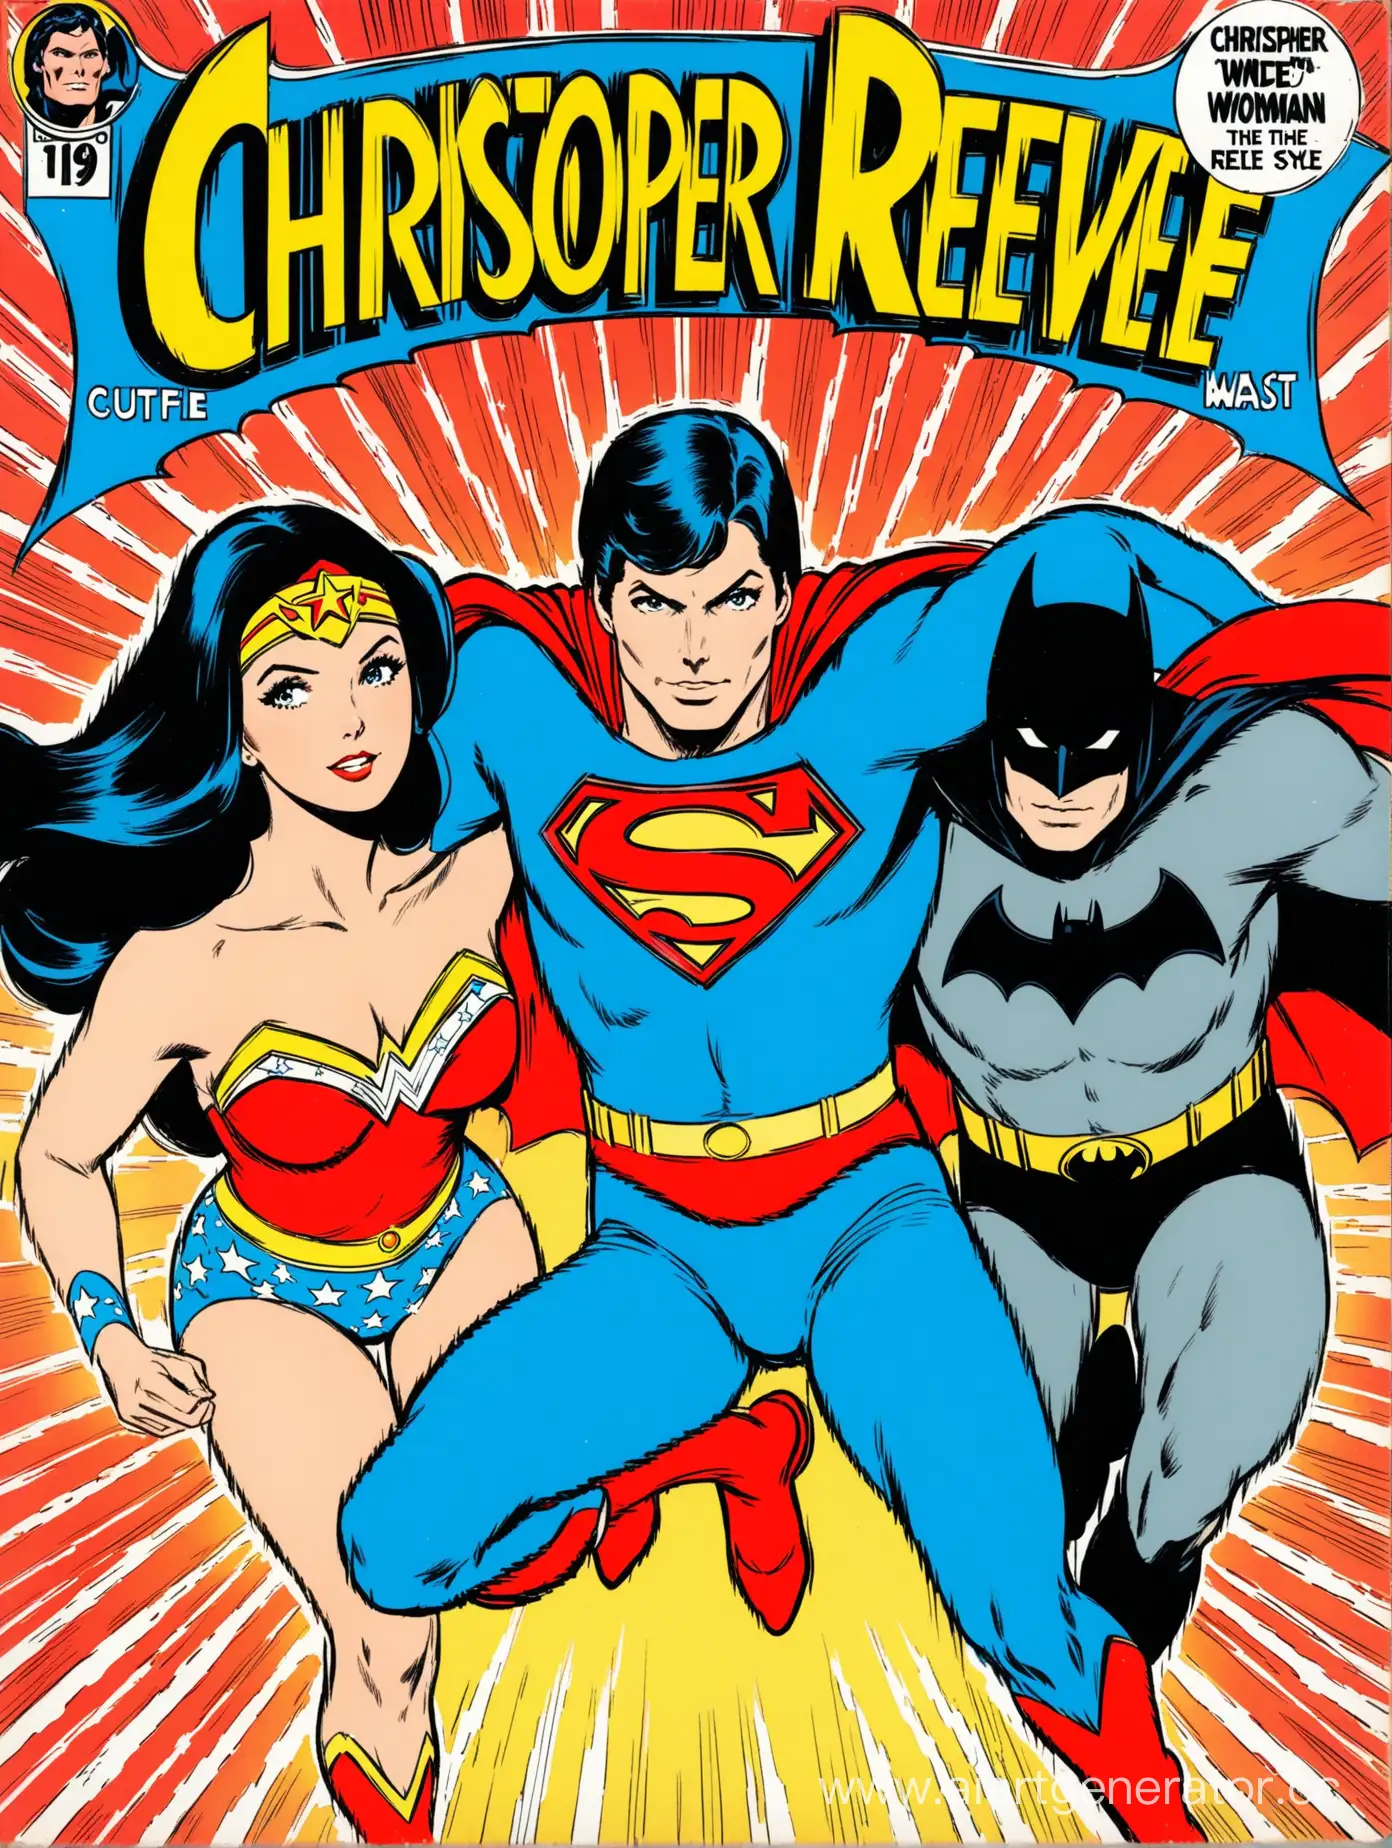 Christopher Reeve as Superman, Lynda Carter as Wonder Woman and Adam West as Batman, in the style of a 1960s comic book cover